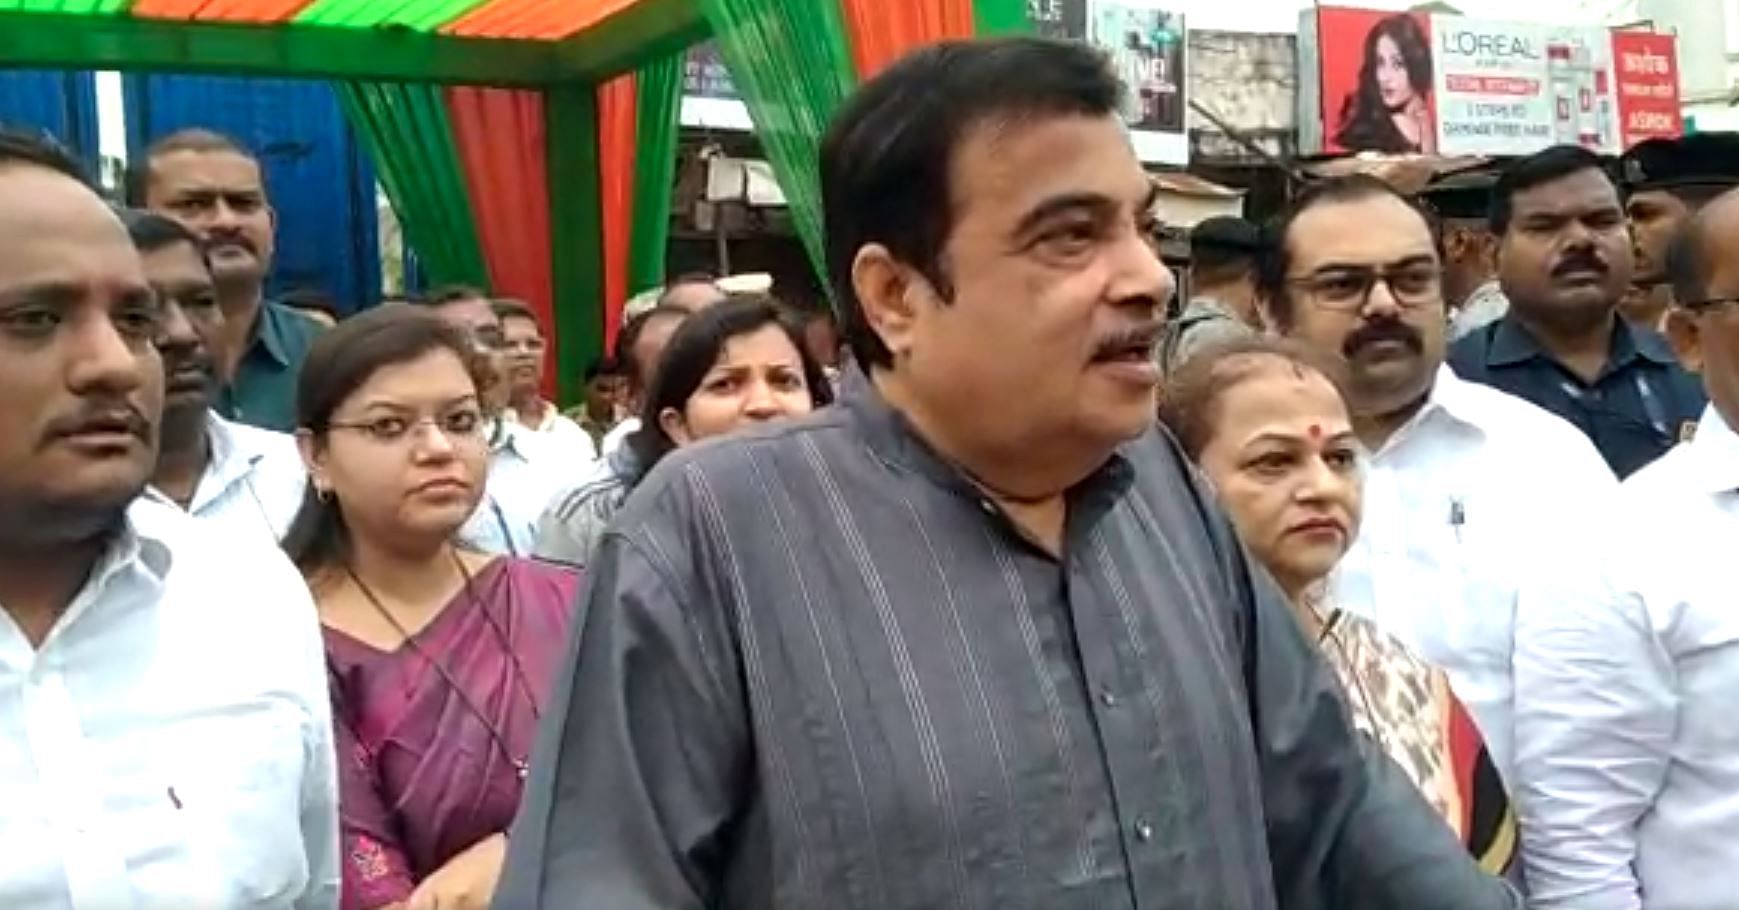 Gadkari also said that it was not proper to link the visits to RSS chief with the government formation process in Maharashtra